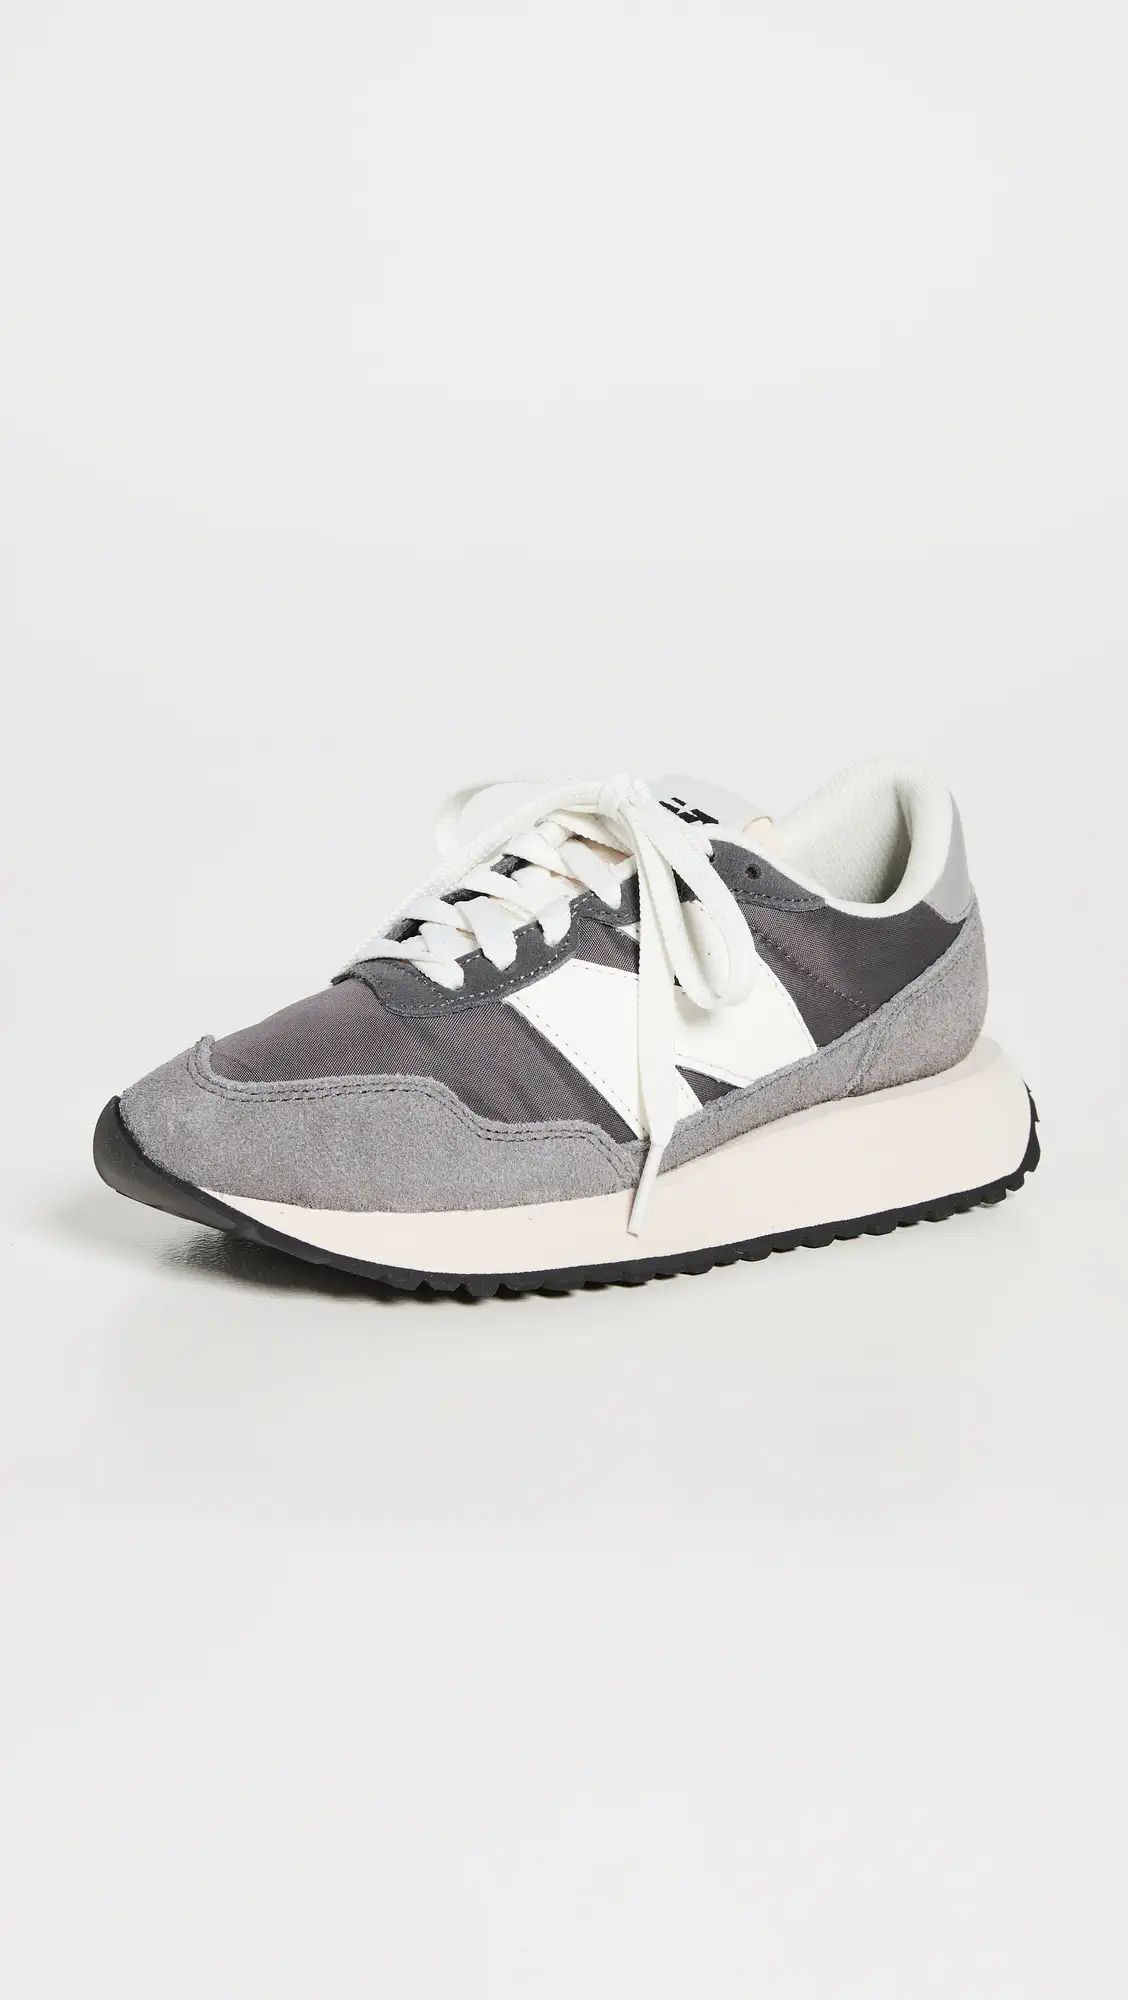 New Balance 237 Lace Up Sneakers | Shopbop | Shopbop